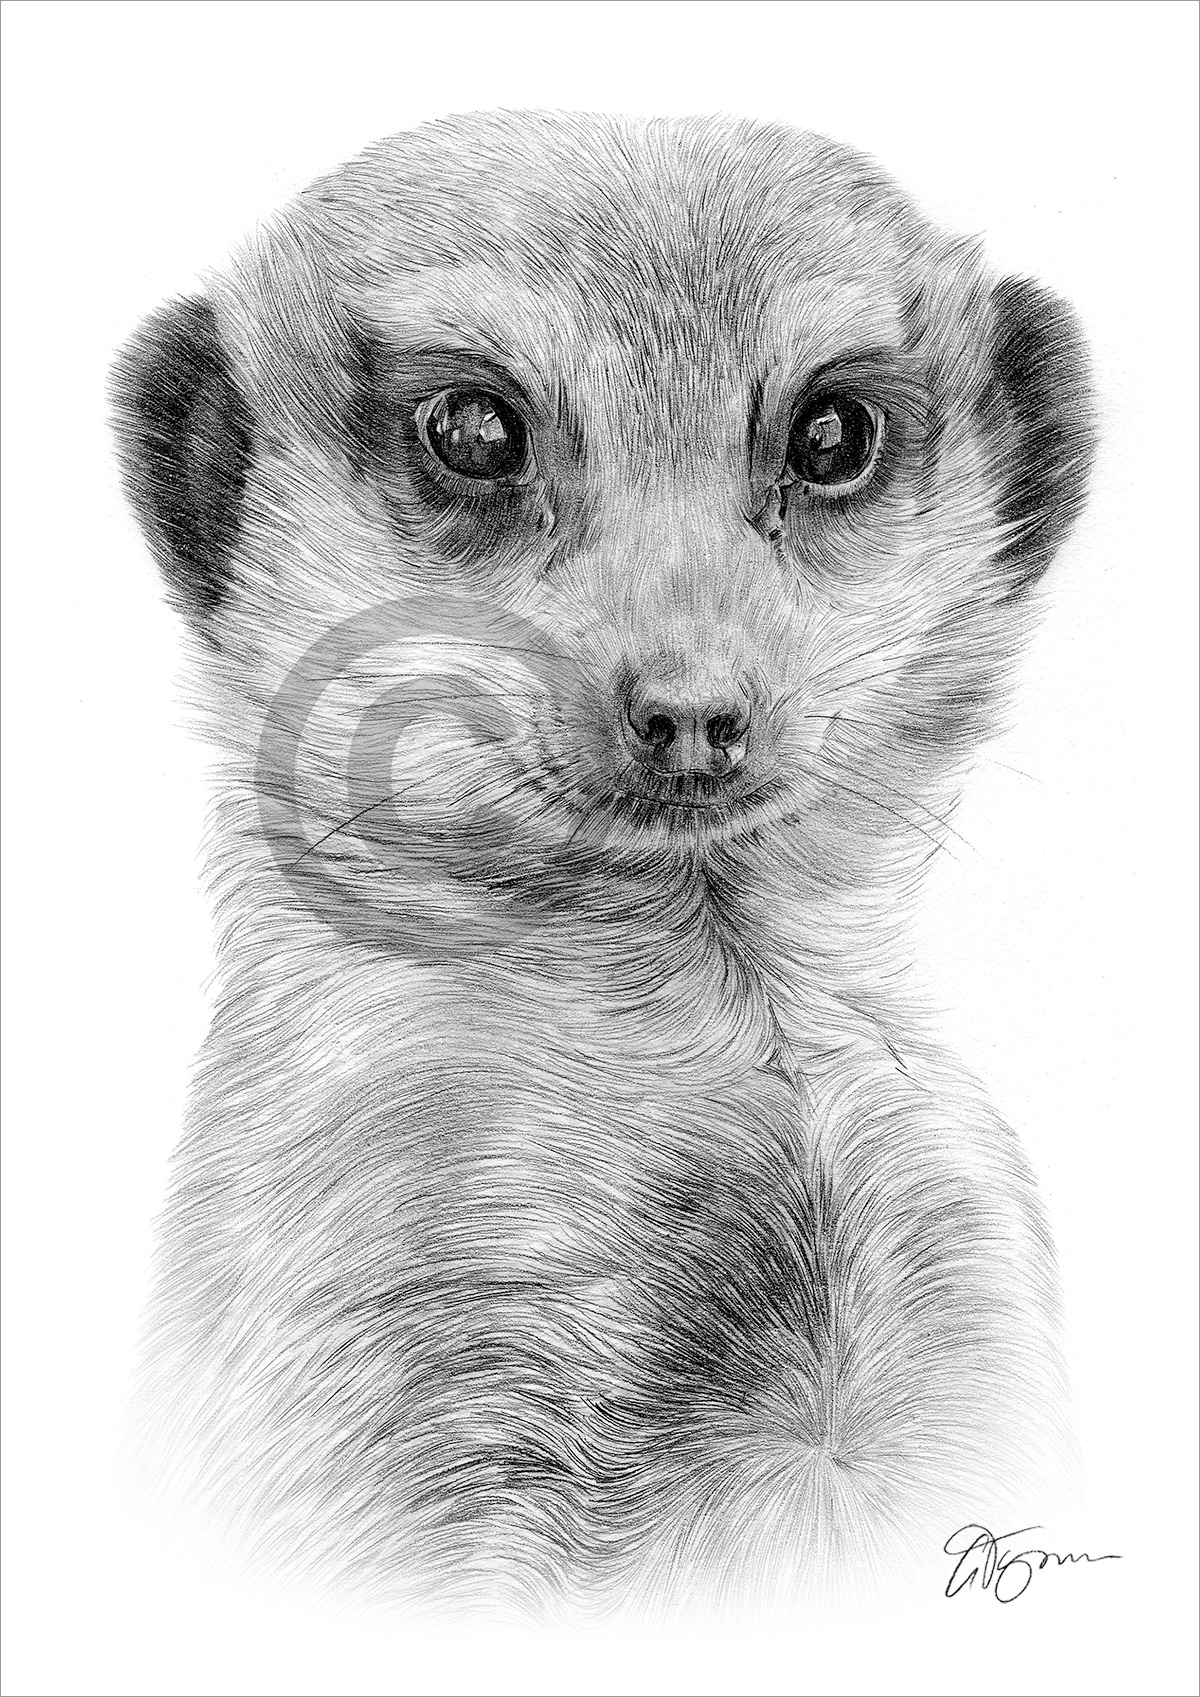 Pencil drawing of an African meerkat by artist Gary Tymon